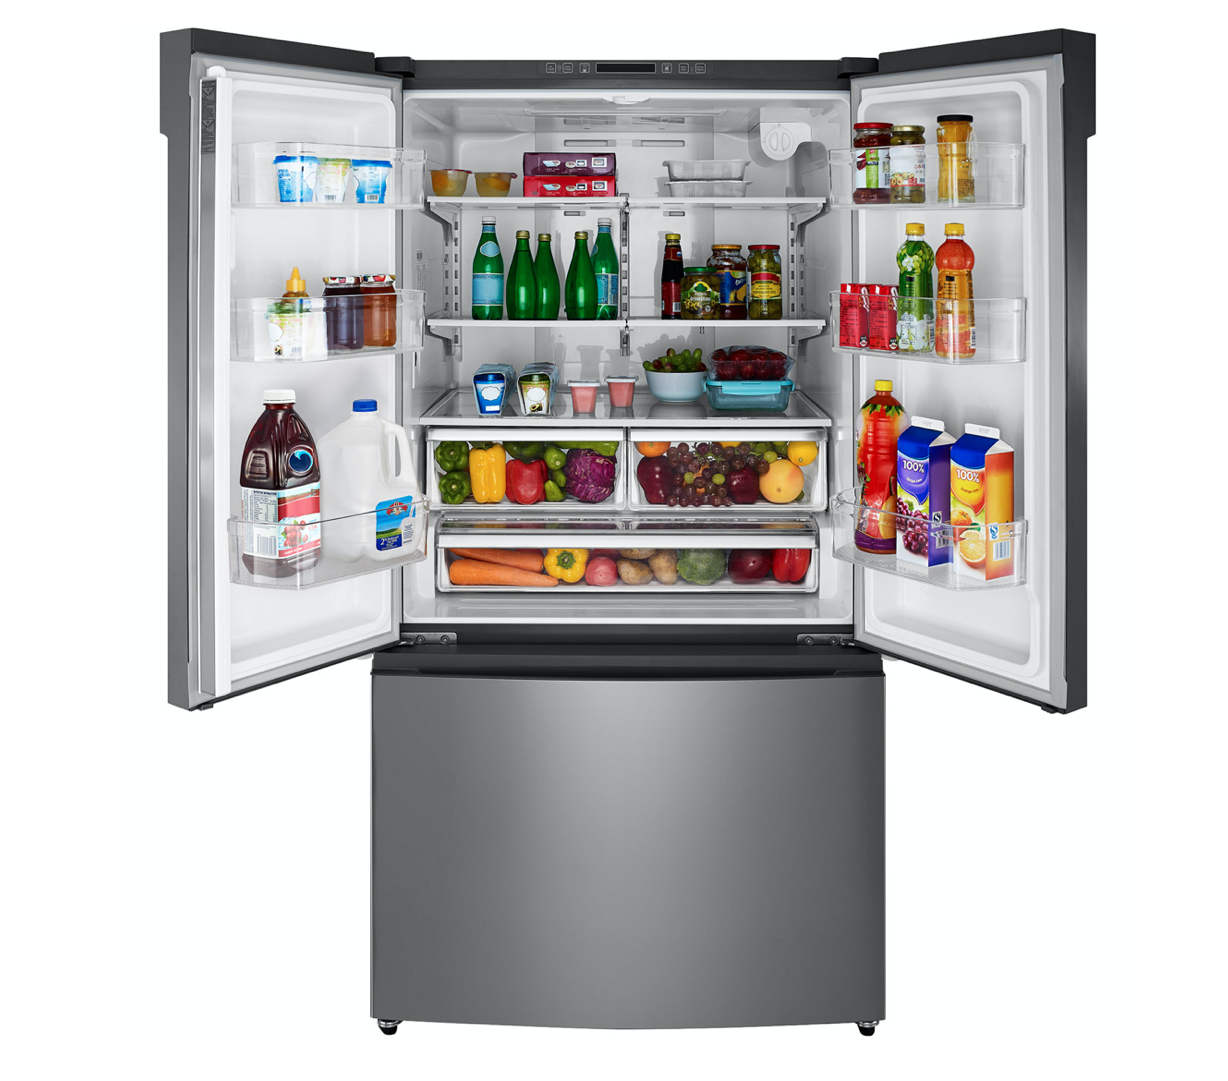 Insignia French door refrigerator open with food